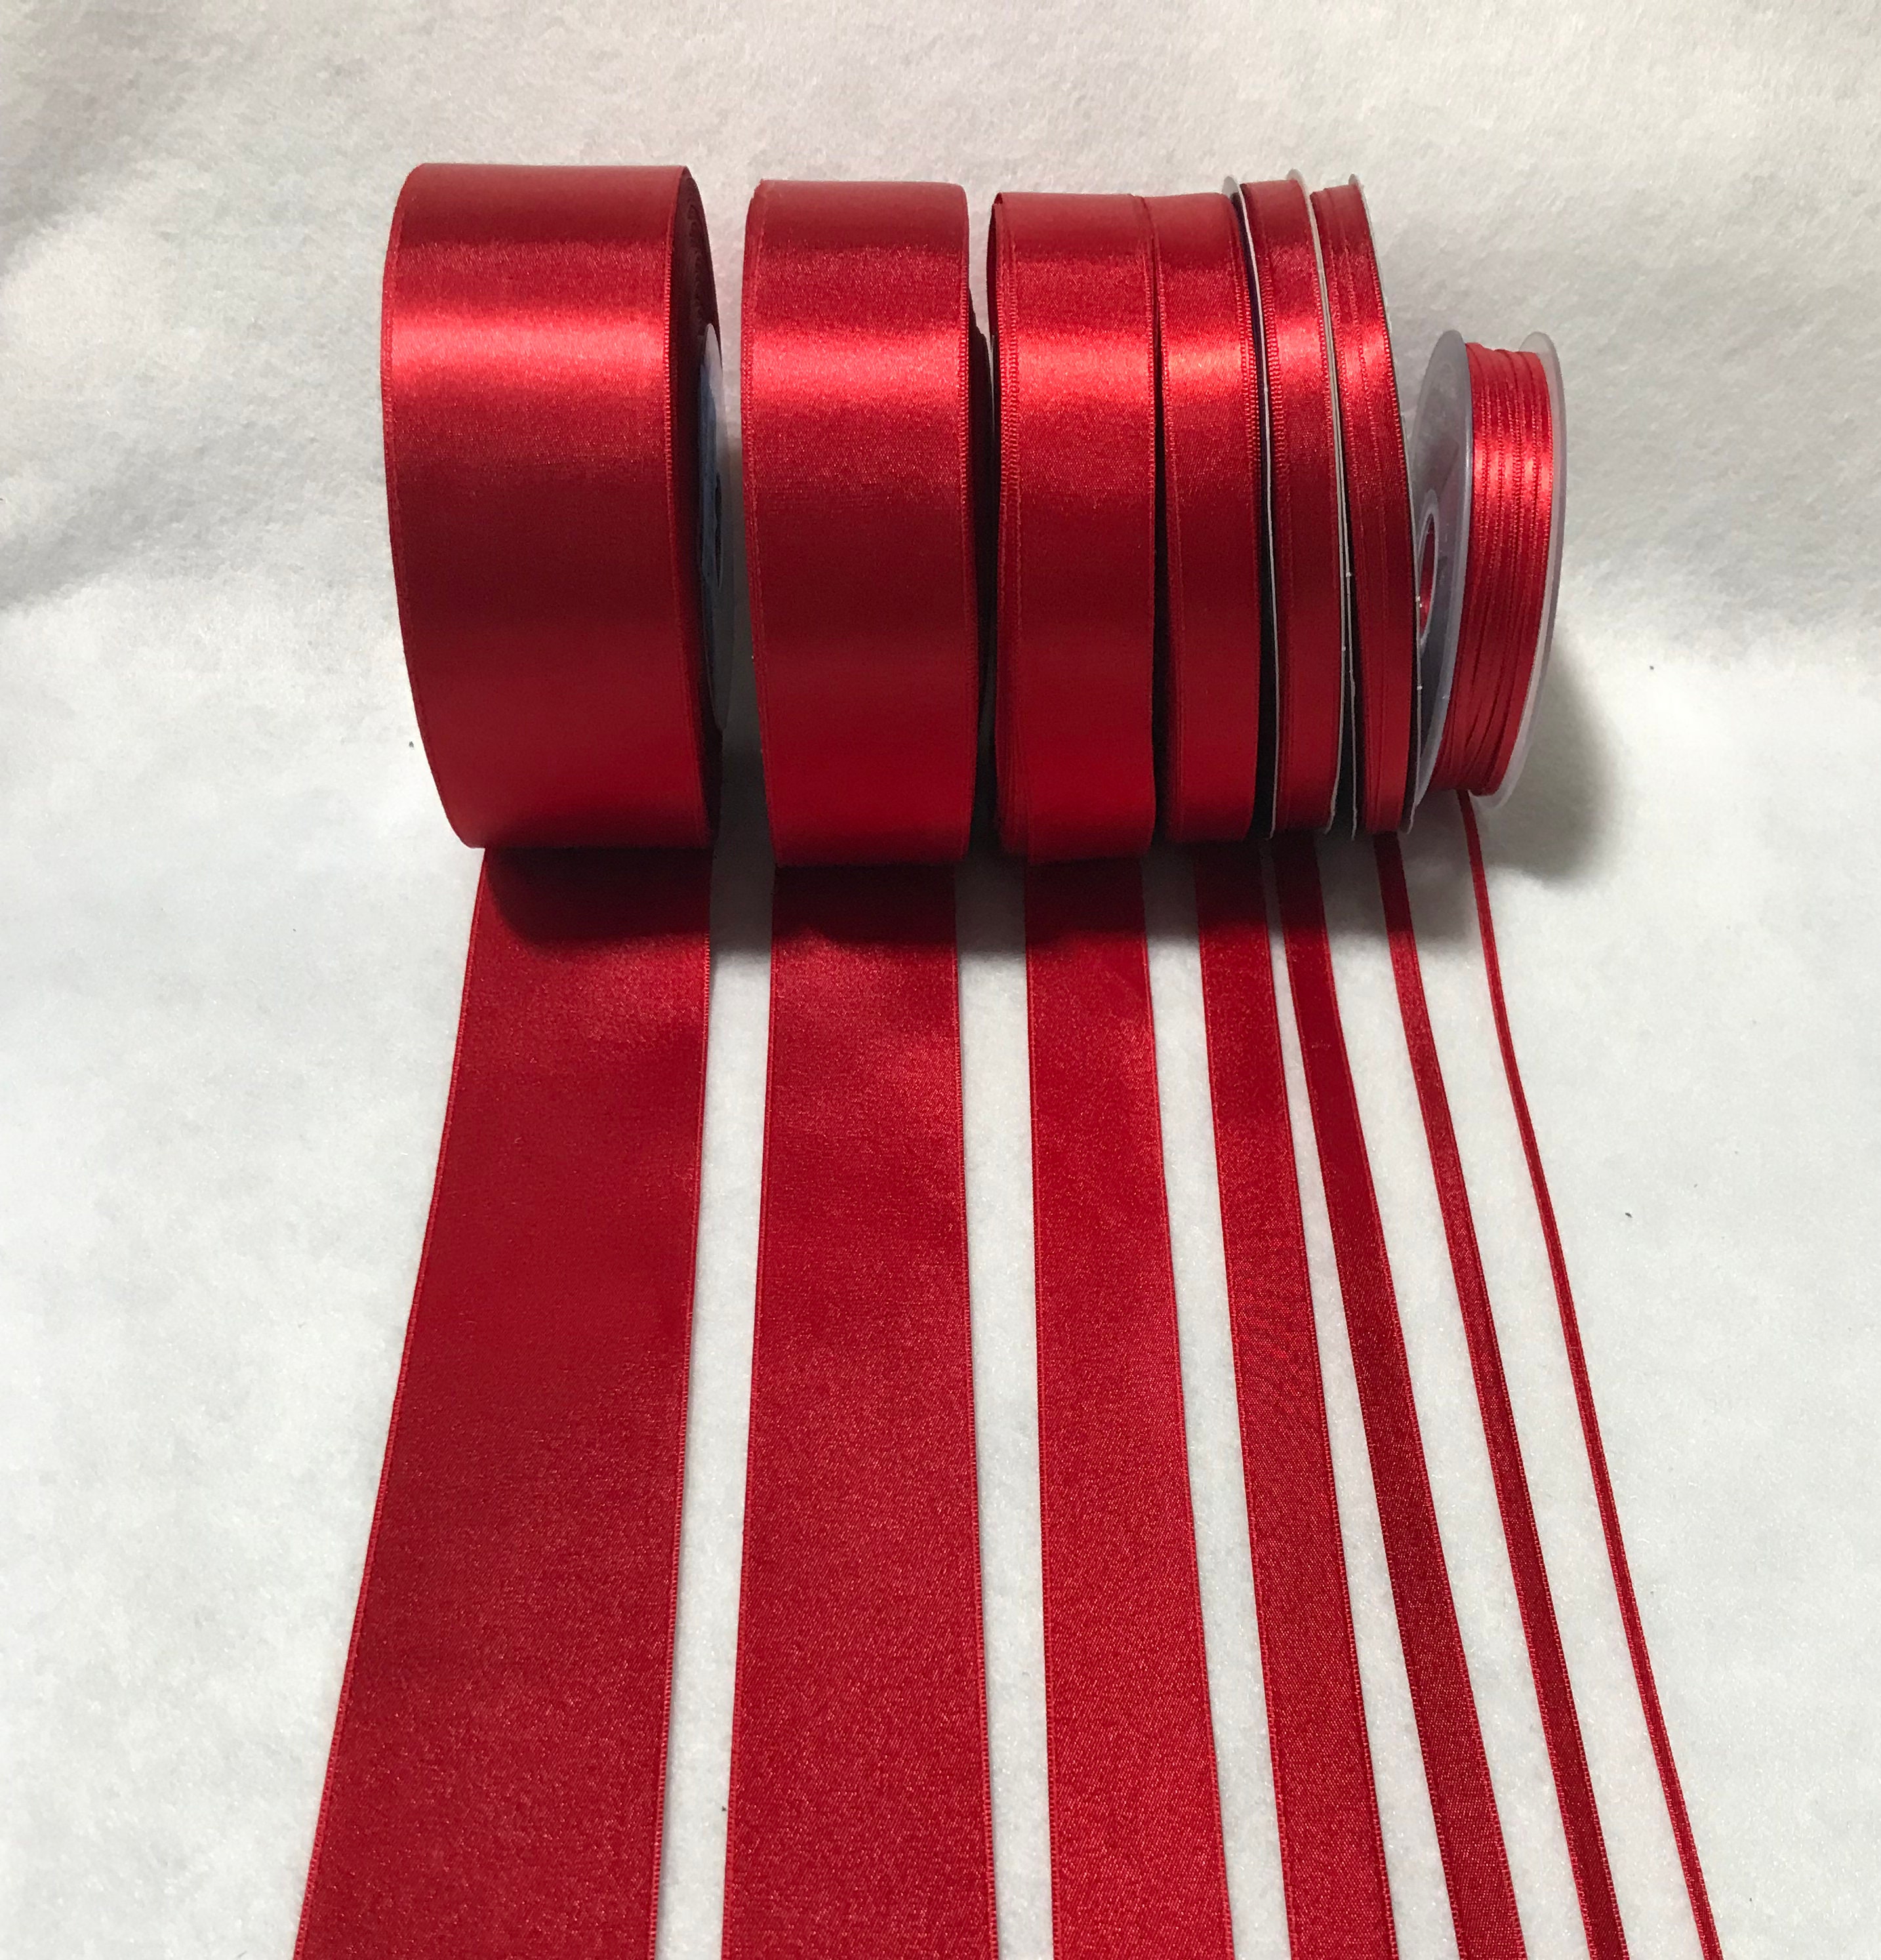 Red Satin Ribbon 1-1/2 Inches x 25 Yards, Solid Color Fabric Ribbon for  Gift Wrapping, Crafts, Hair Bows Making, Wreath, Wedding Party Decoration  and